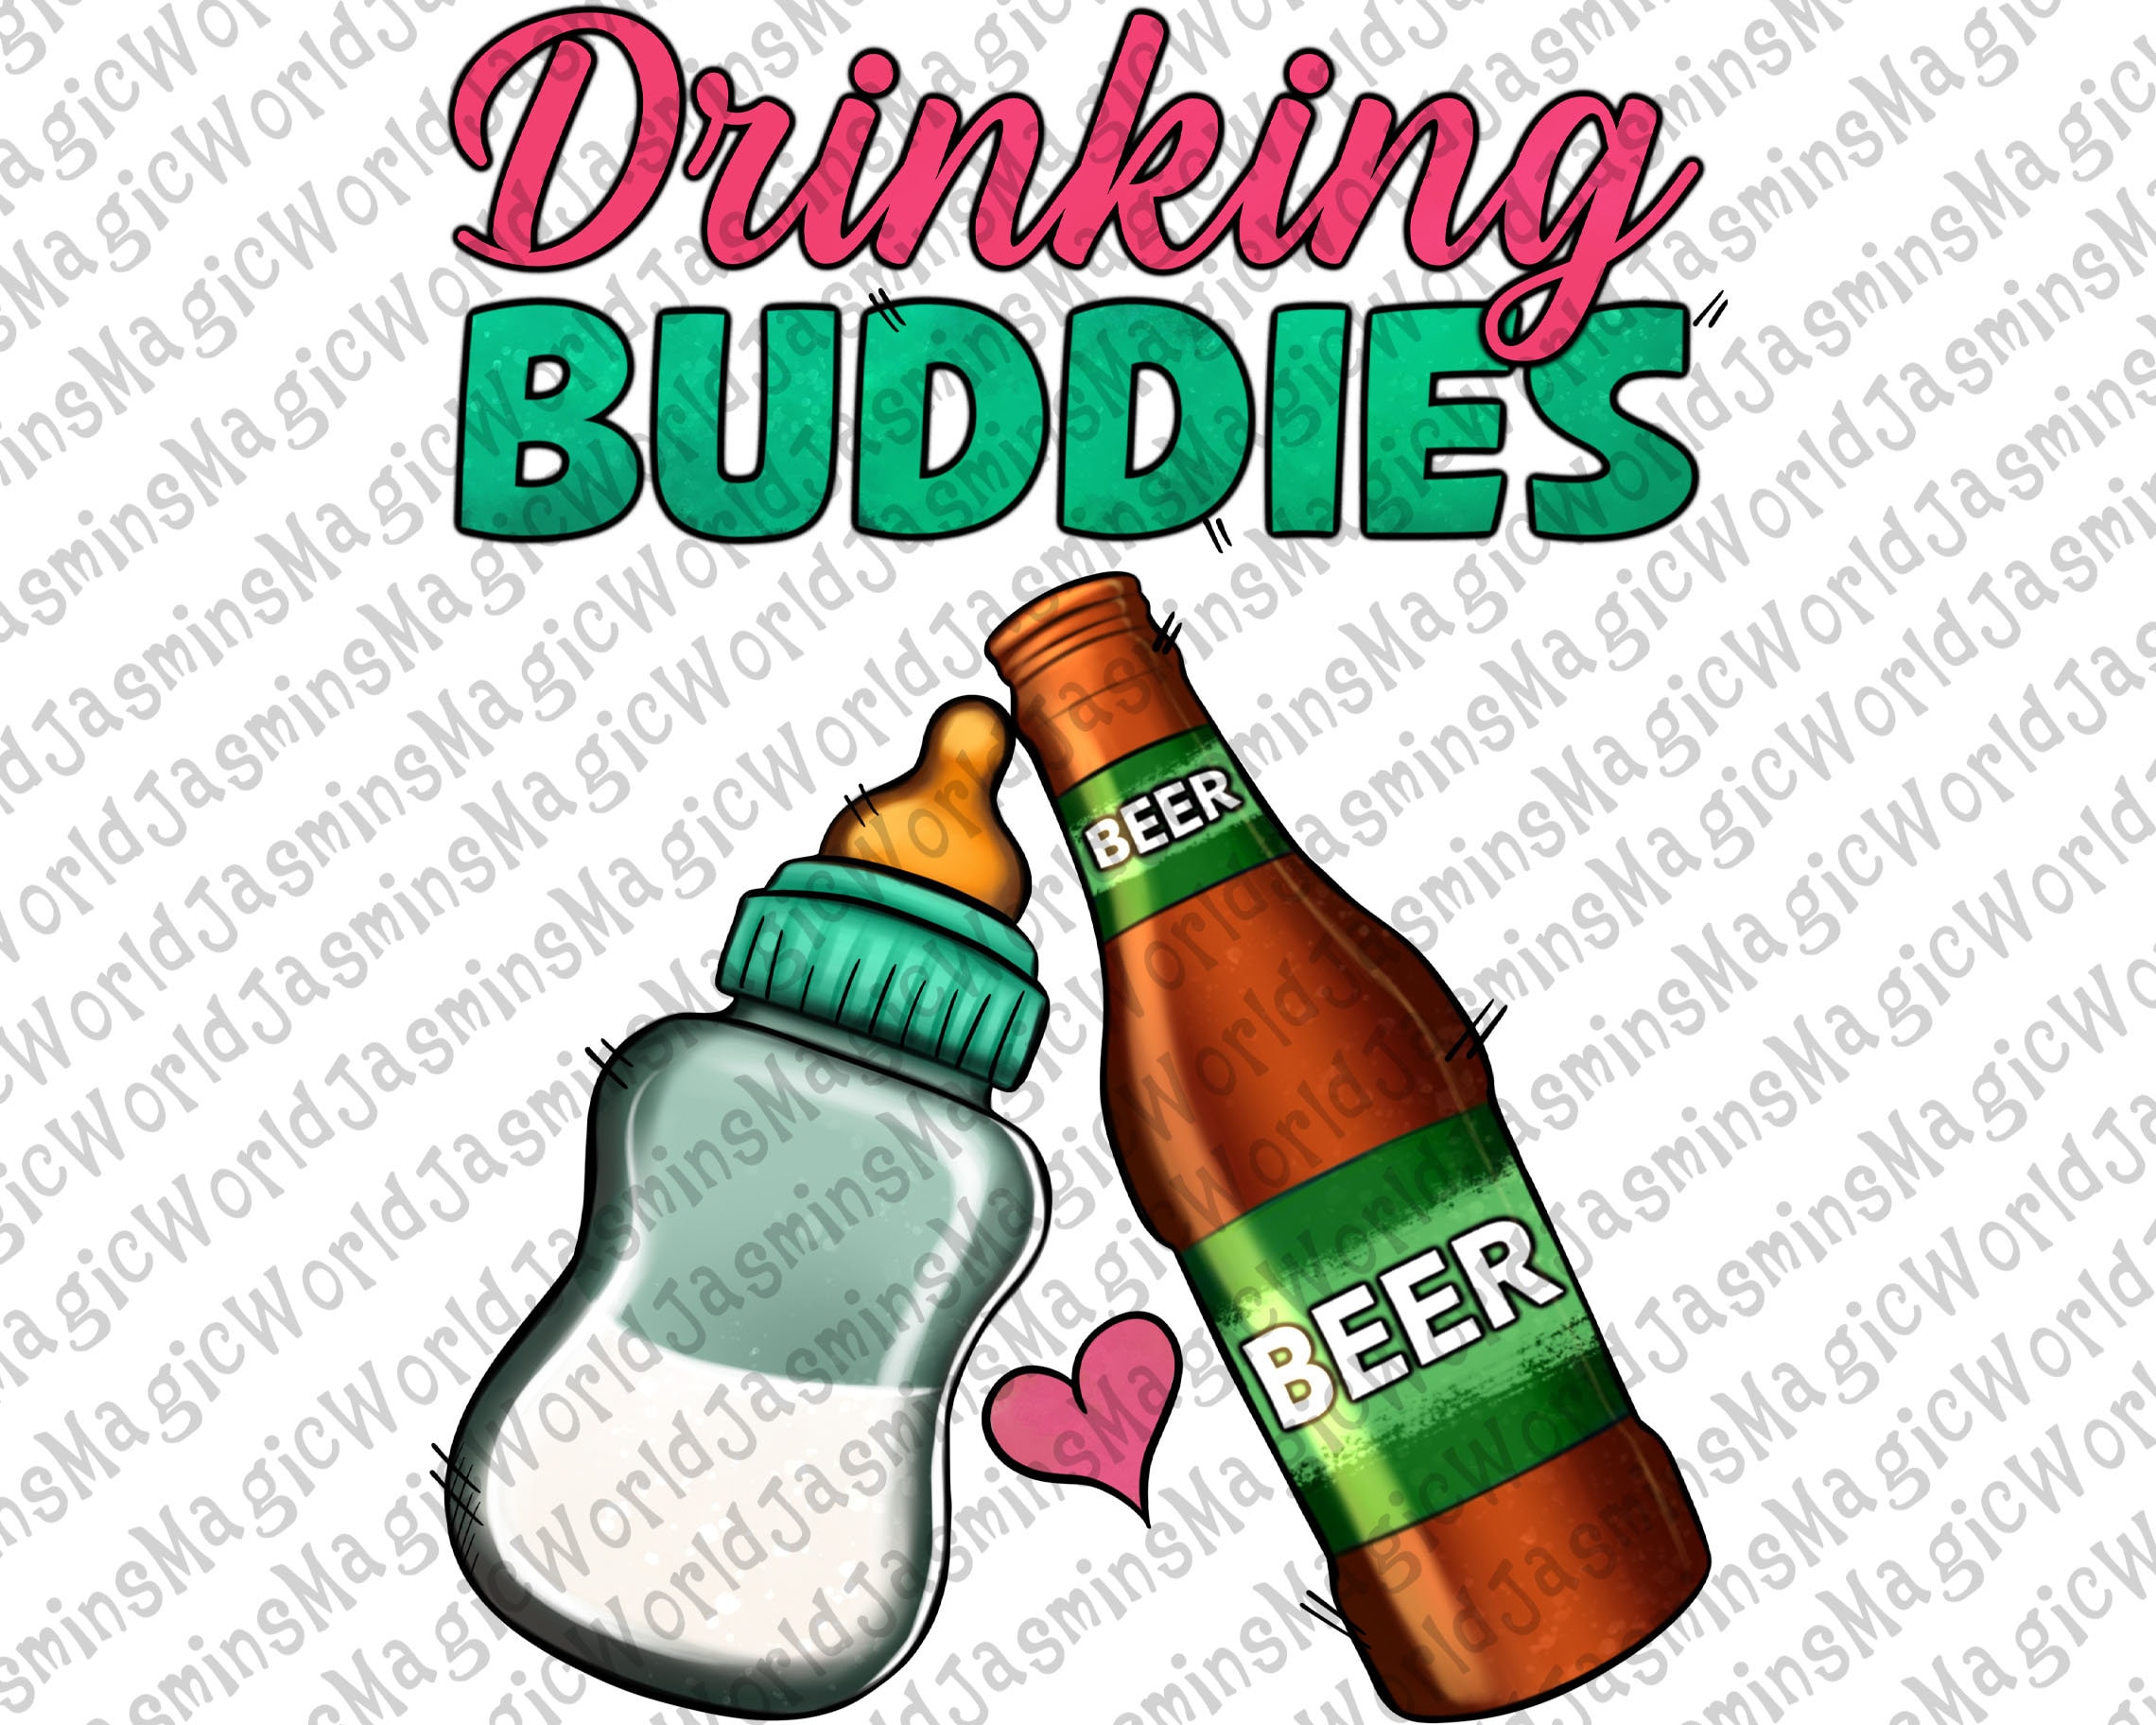 Daddy's Drinking Buddy Beer Graphic by SVGitems · Creative Fabrica